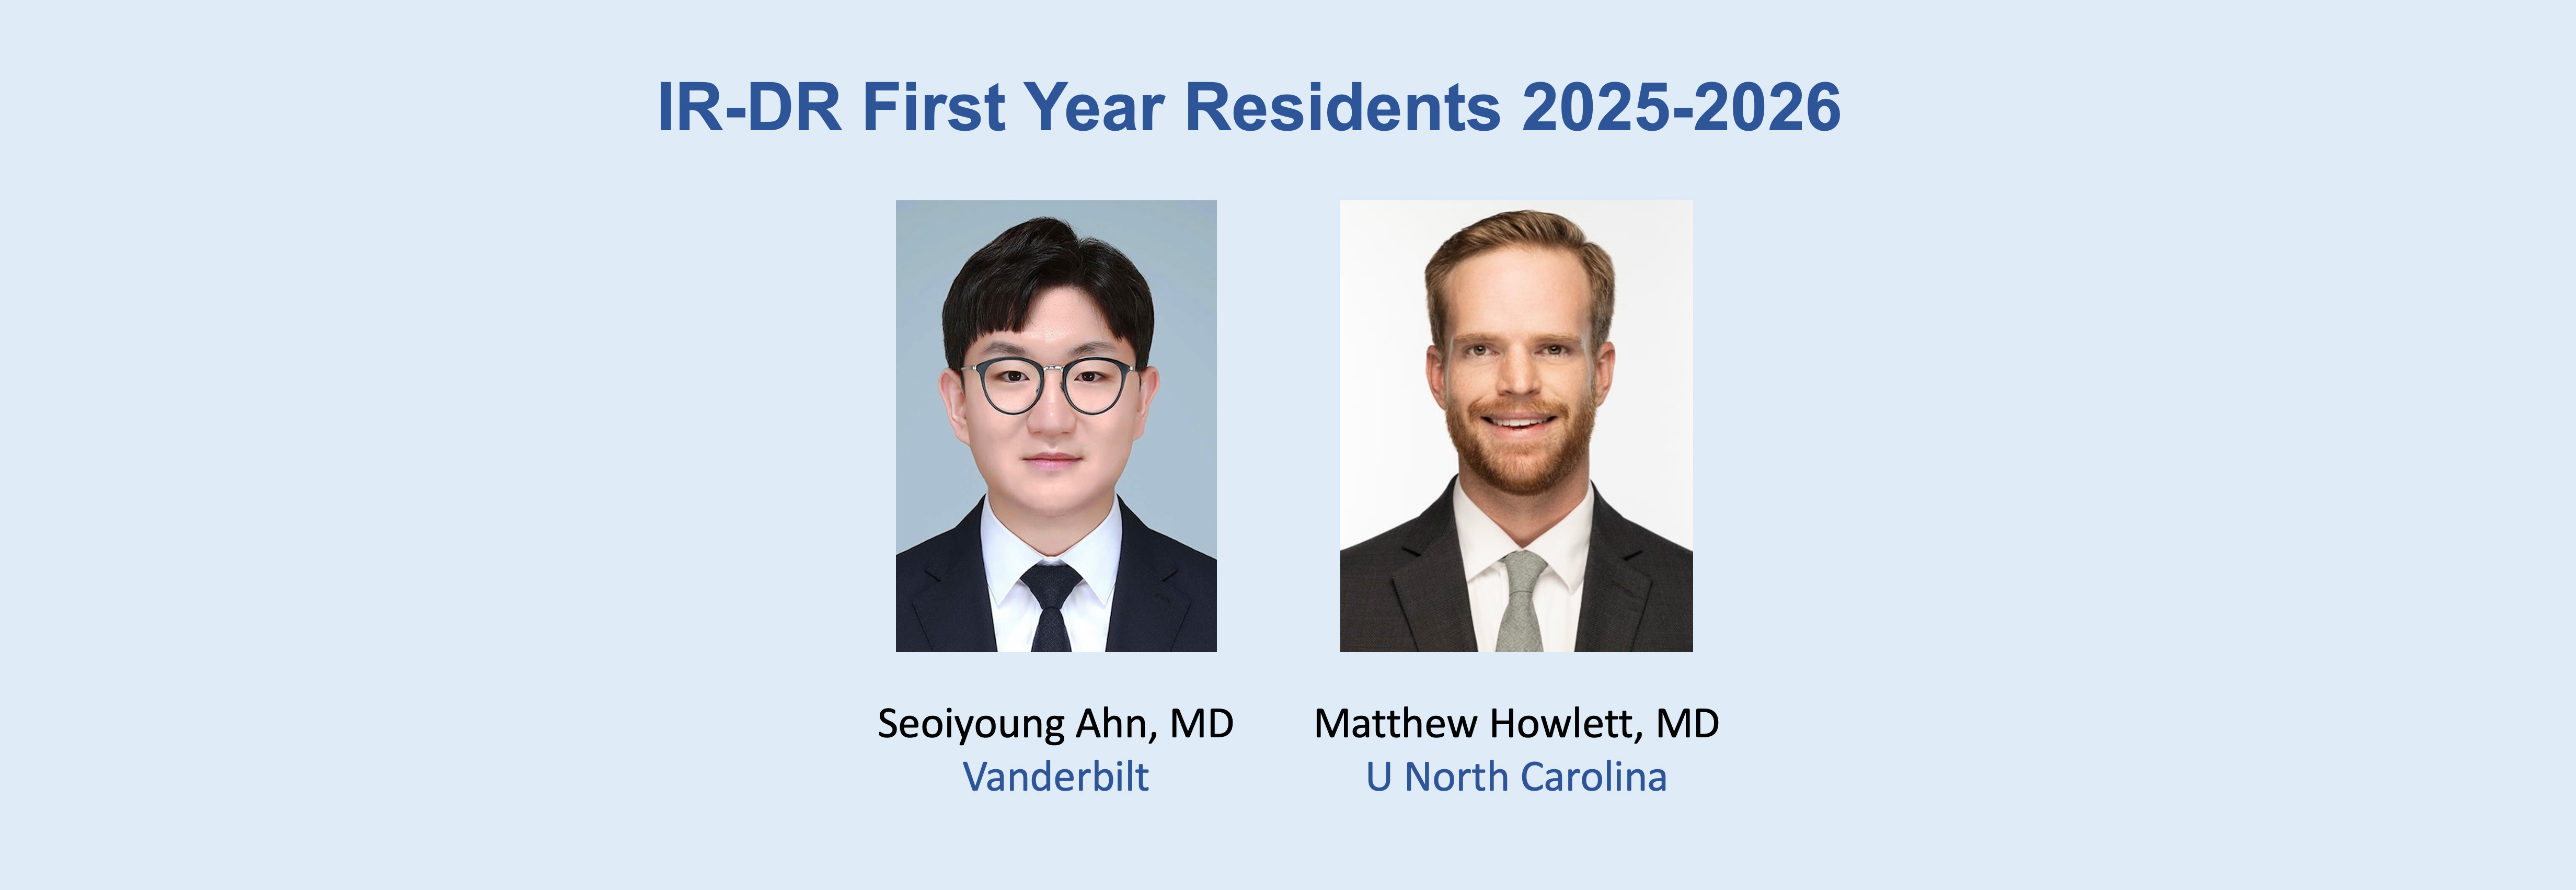 UCSF Radiology IR-DR First Year Residents 2025-2026